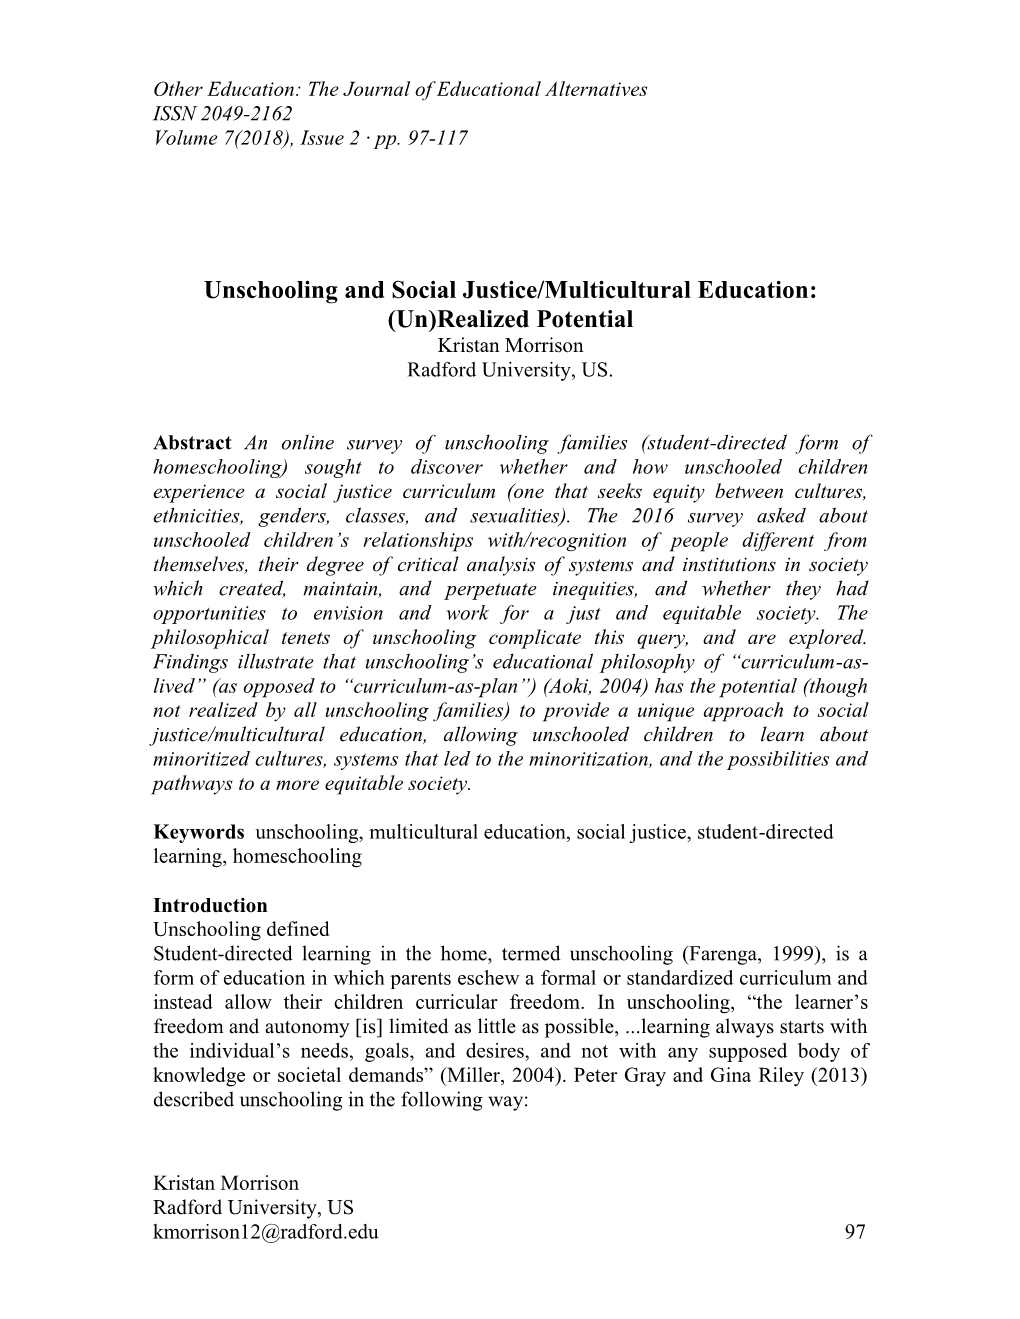 Unschooling and Social Justice/Multicultural Education: (Un)Realized Potential Kristan Morrison Radford University, US